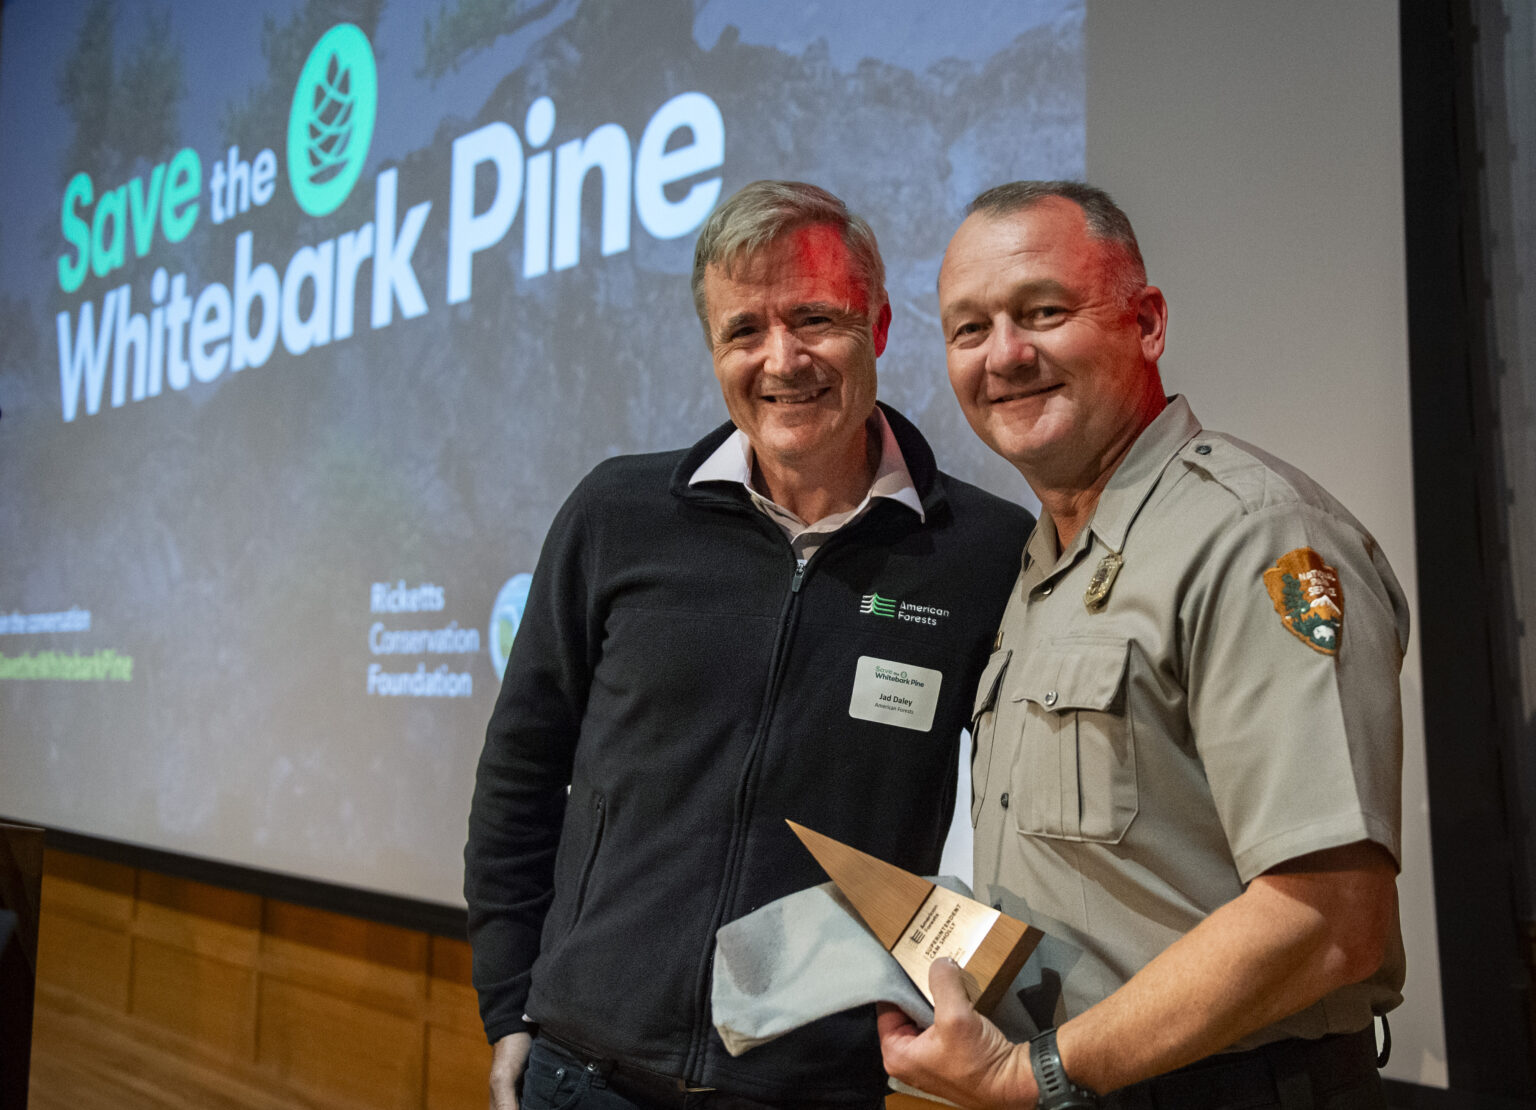 Jad Daley, President and CEO of American Forests, left, gives Cam Sholly, Superintendent of Yellowstone National Park, an award at the Museum of the Rockies on Thursday, Sept. 28, 2023, in Bozeman, Mont.